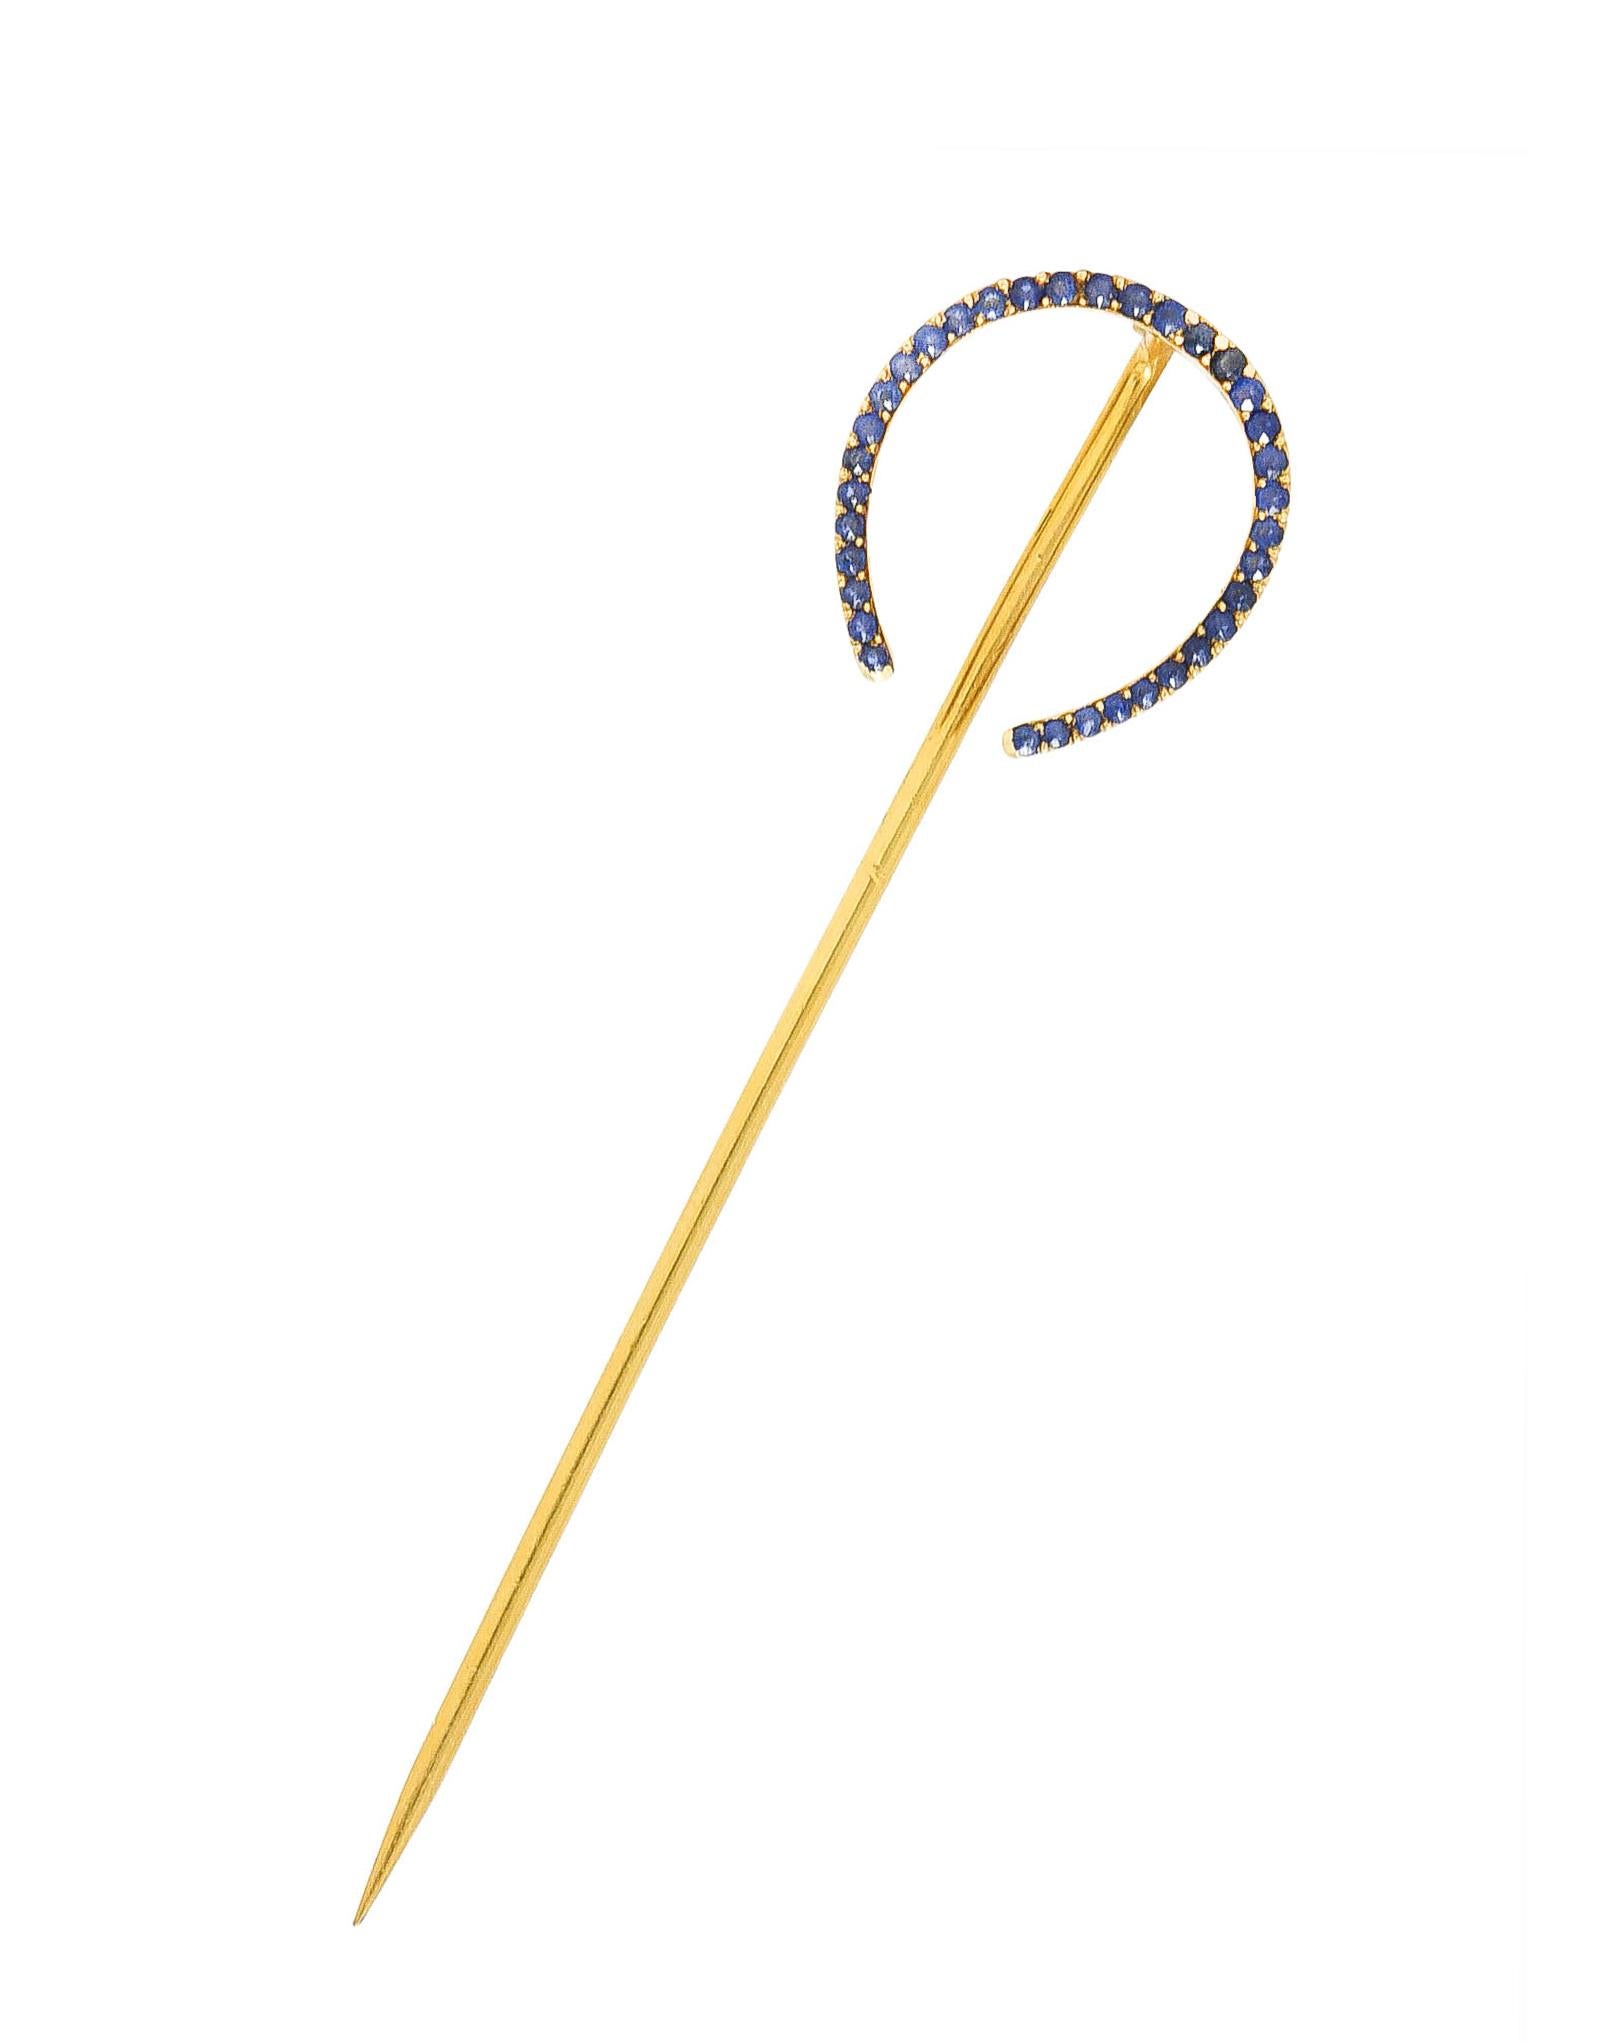 Stickpin features a horseshoe form with bead set sapphires weighing approximately 0.50 carats

Transparent and ranging from blue to denim blue with light to medium saturation

With scalloped gold profile

Tested as 18 karat gold

Circa: